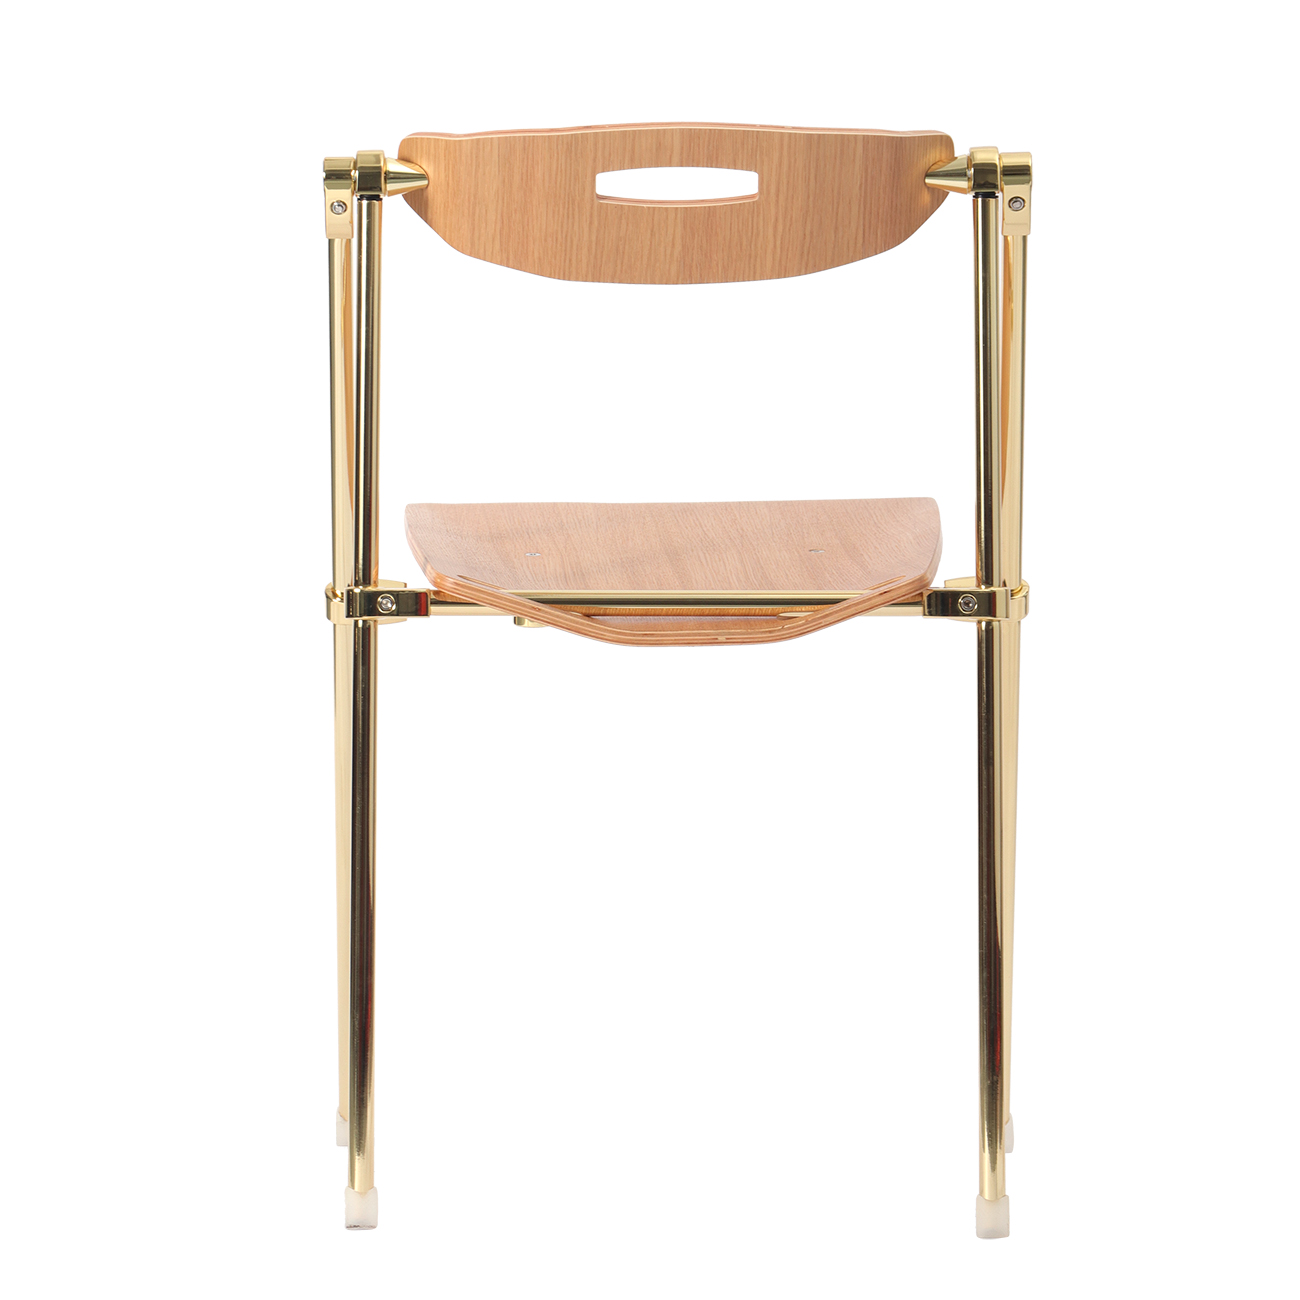 Modern Folding Chair with Wooden Seat and Gold Metal Frame